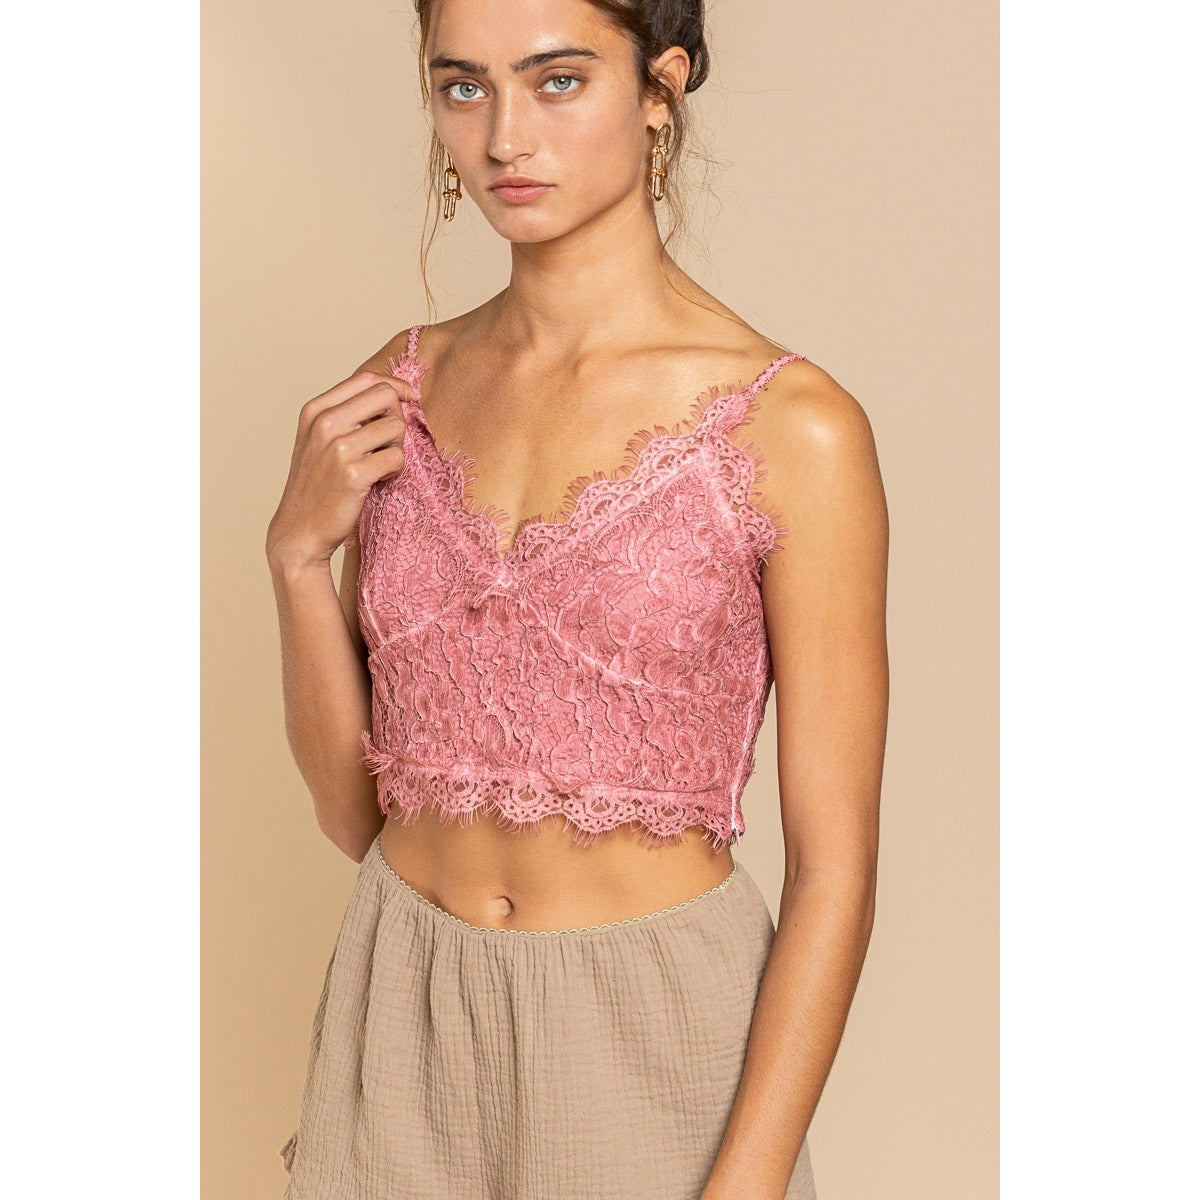 Lace Crop Top with Side Zip in Sangria Red.